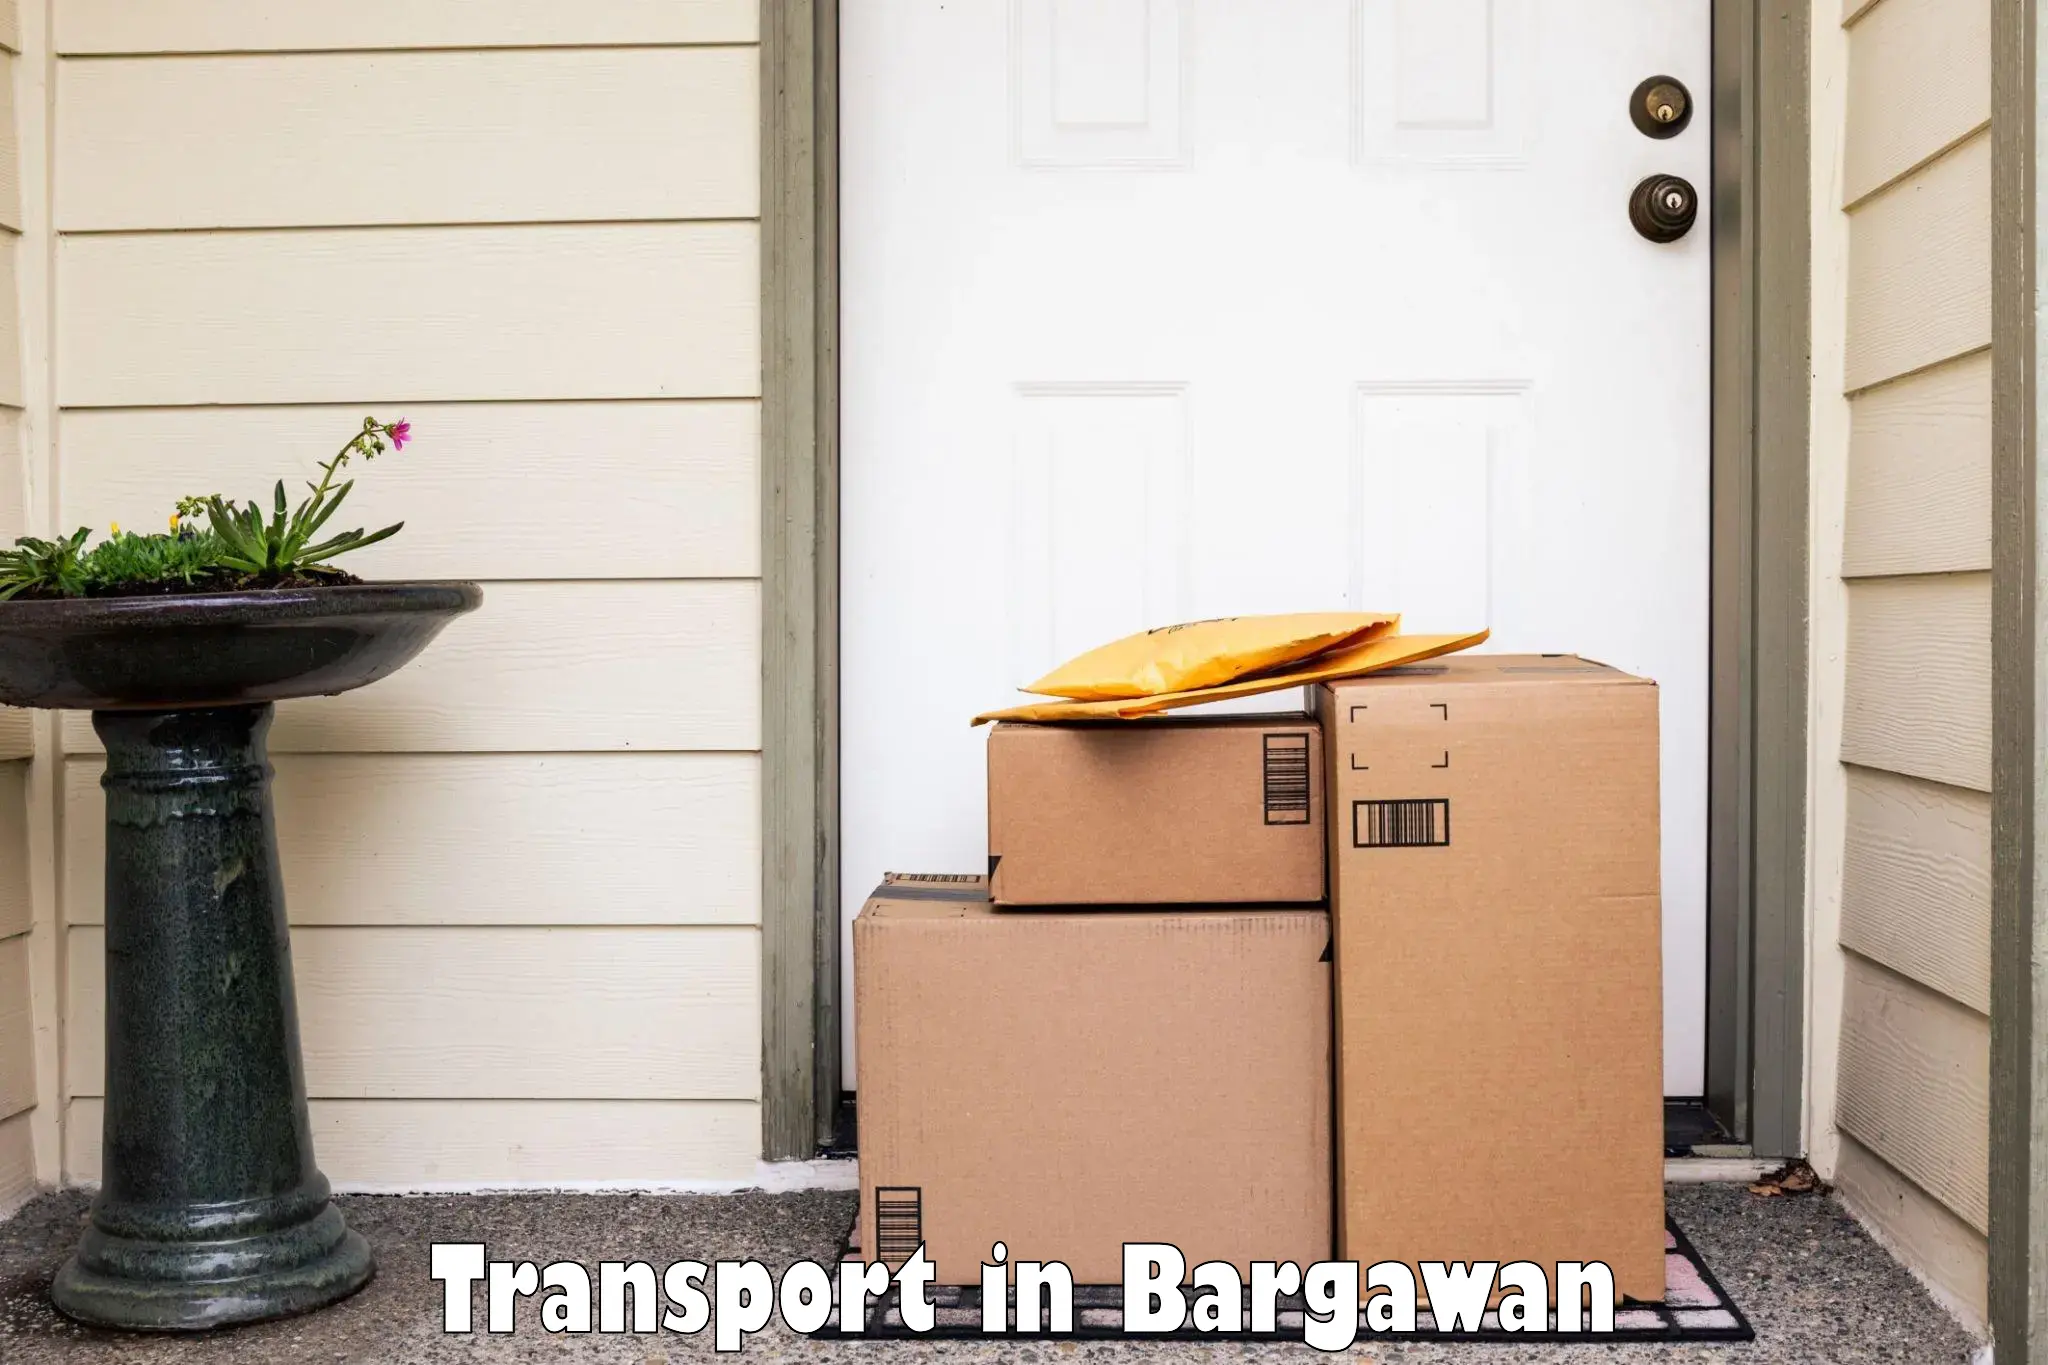 Container transport service in Bargawan